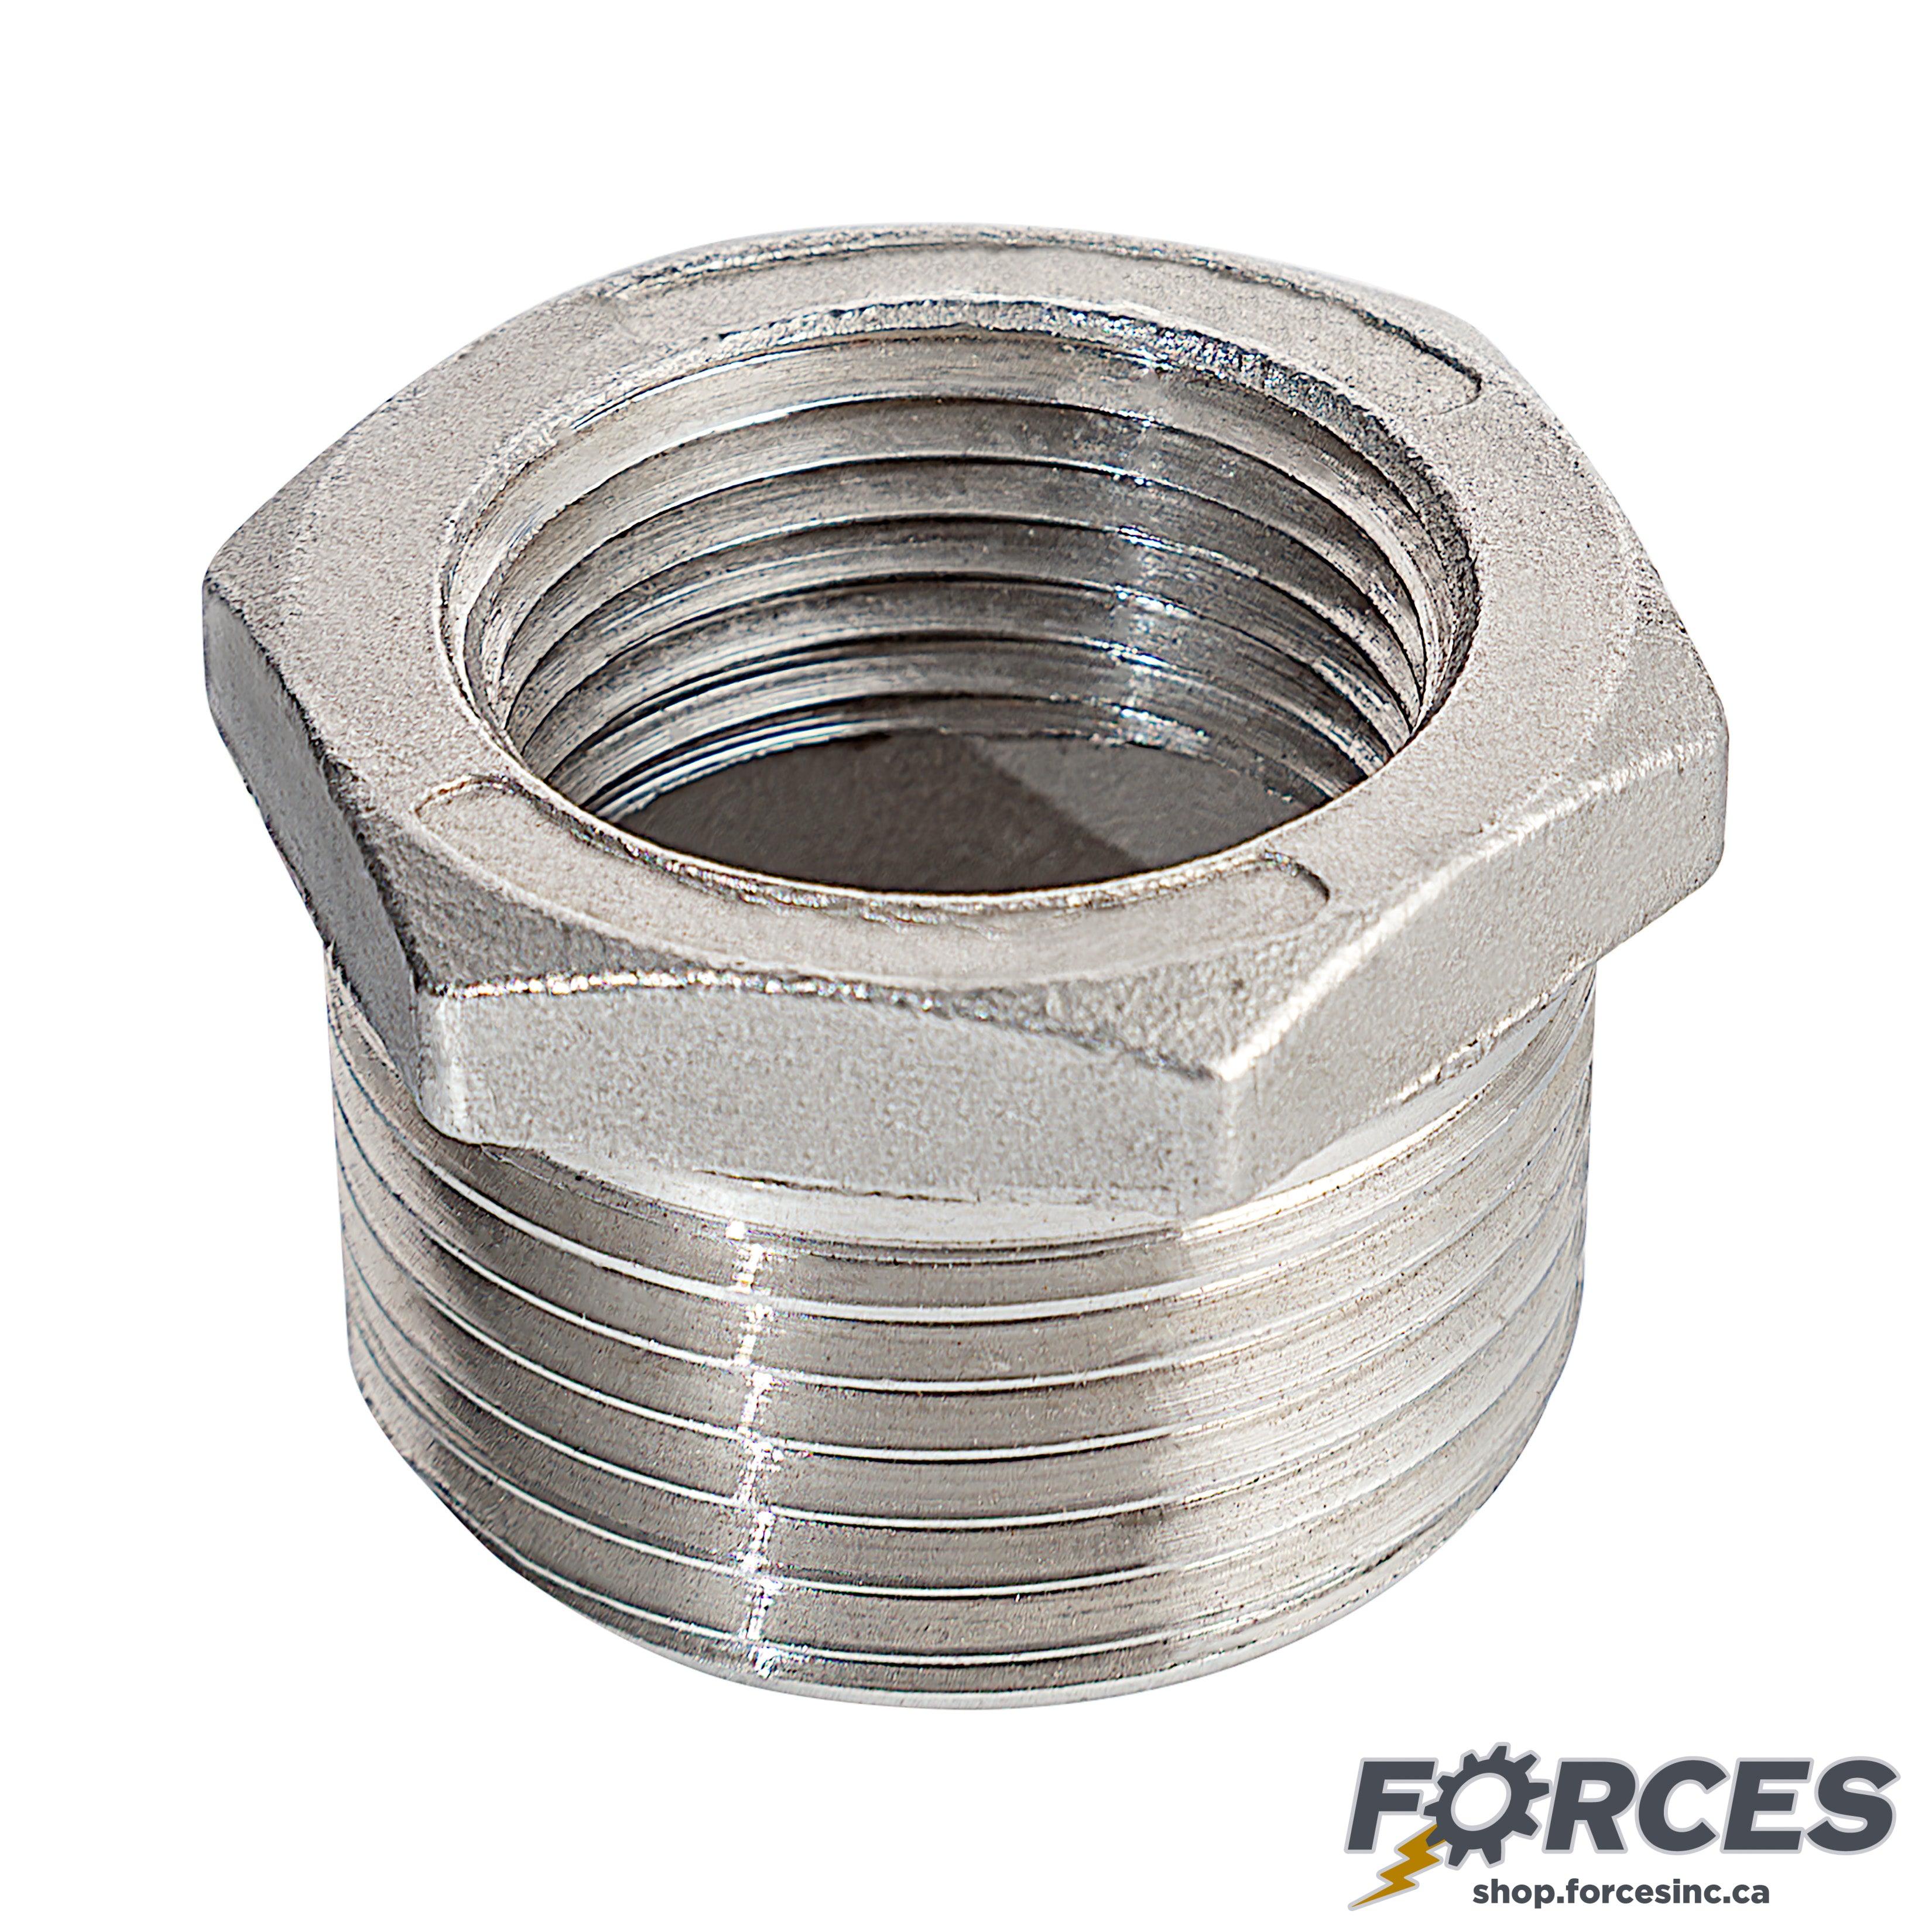 3/8" (M) x 1/8" (F) Reducing Hex Bushing NPT #150 - Stainless Steel 316 - Forces Inc